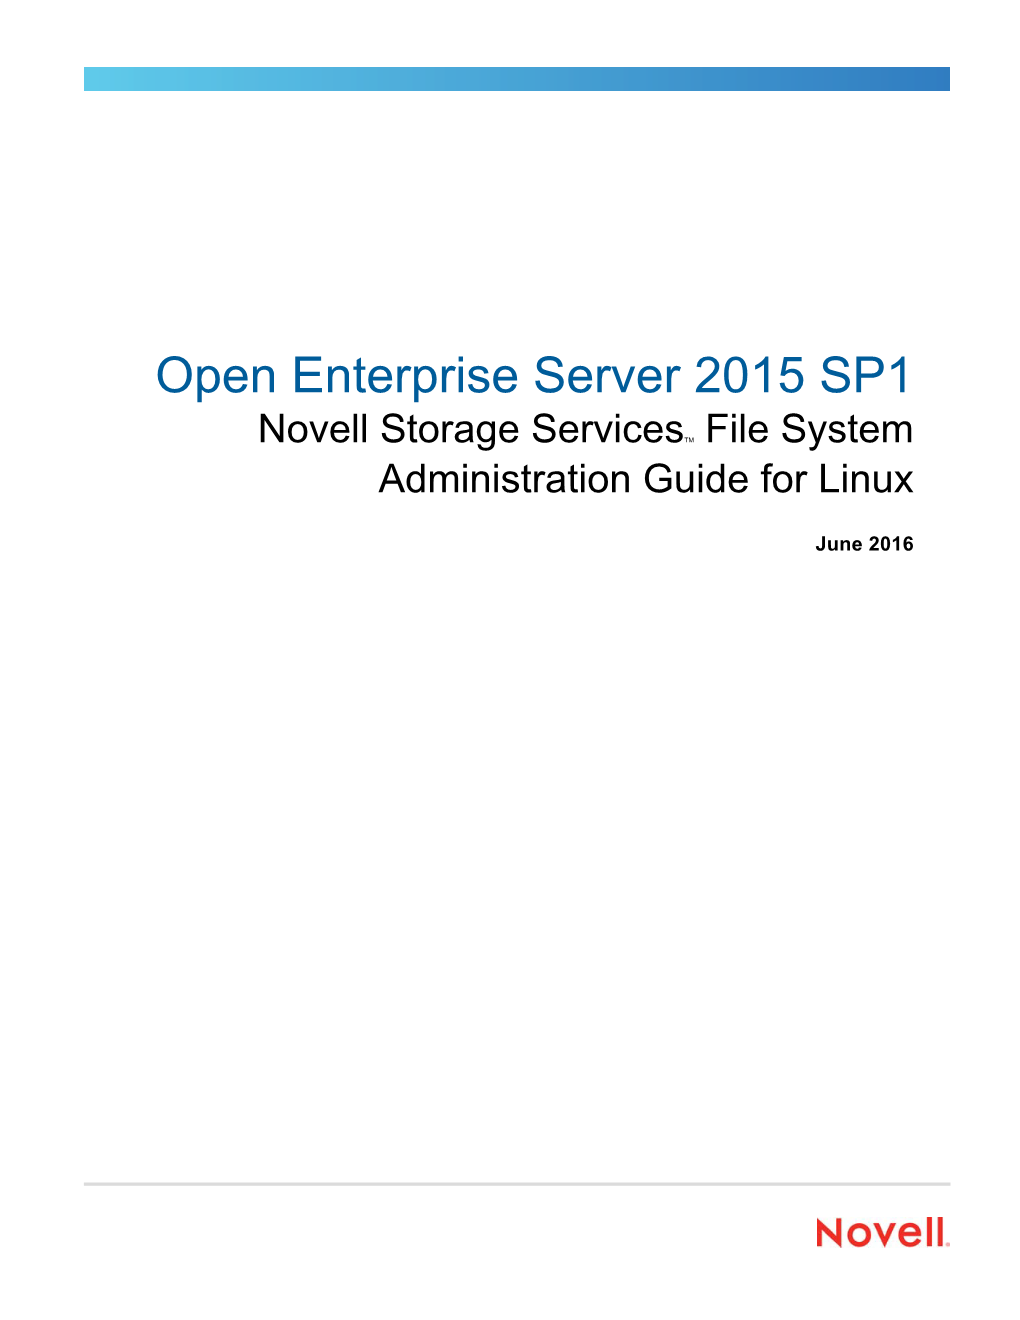 NSS File System Administration Guide for Linux Is Available on the OES Documentation Website